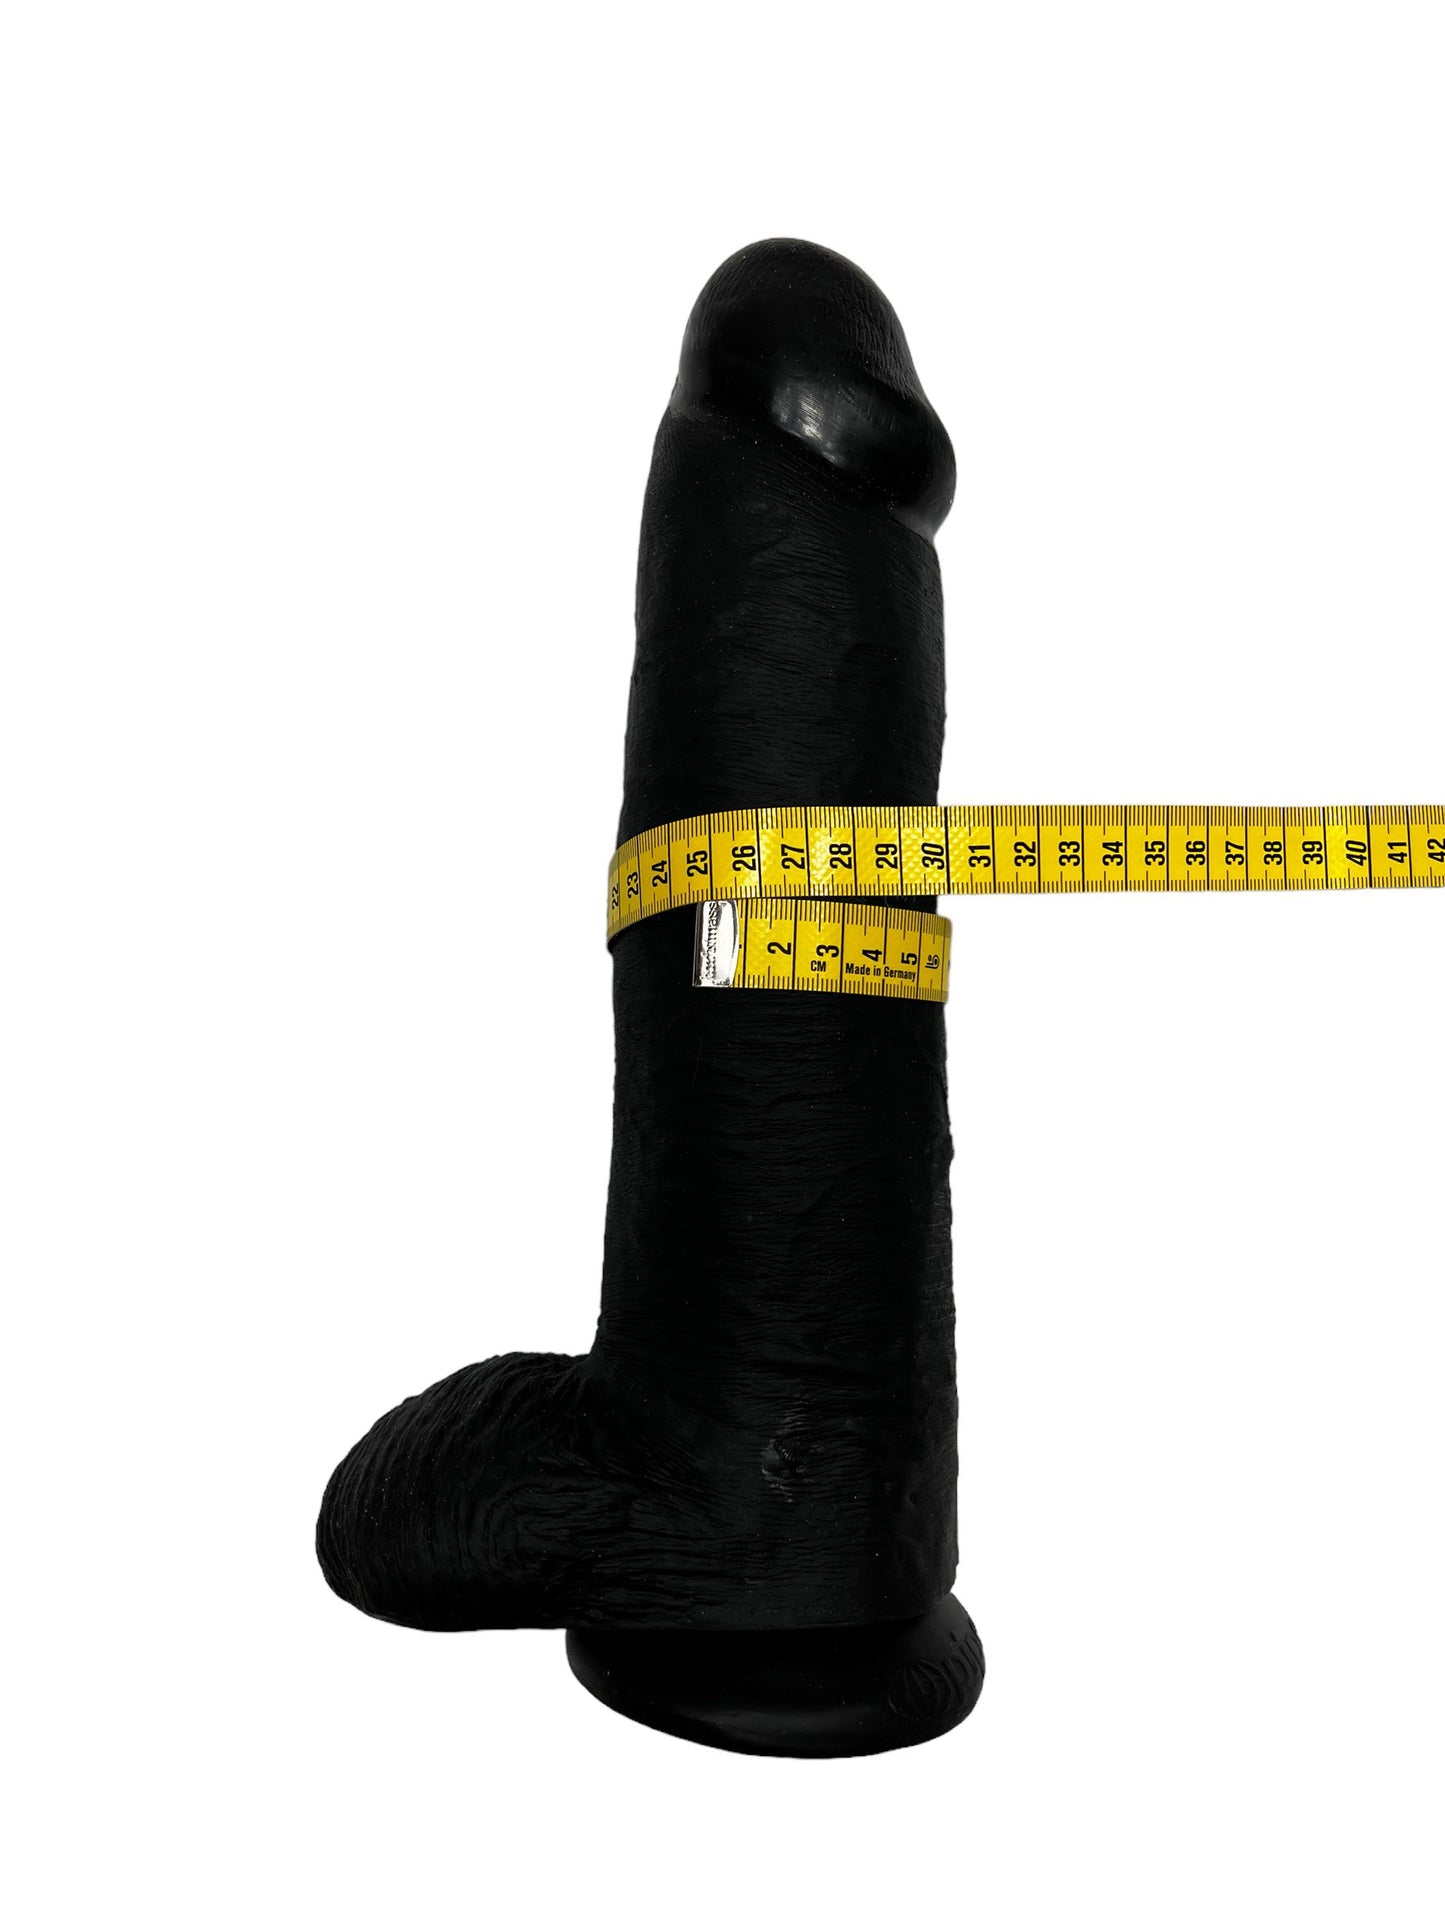 XXL large dildo, 33 cm long, 25 cm in circumference